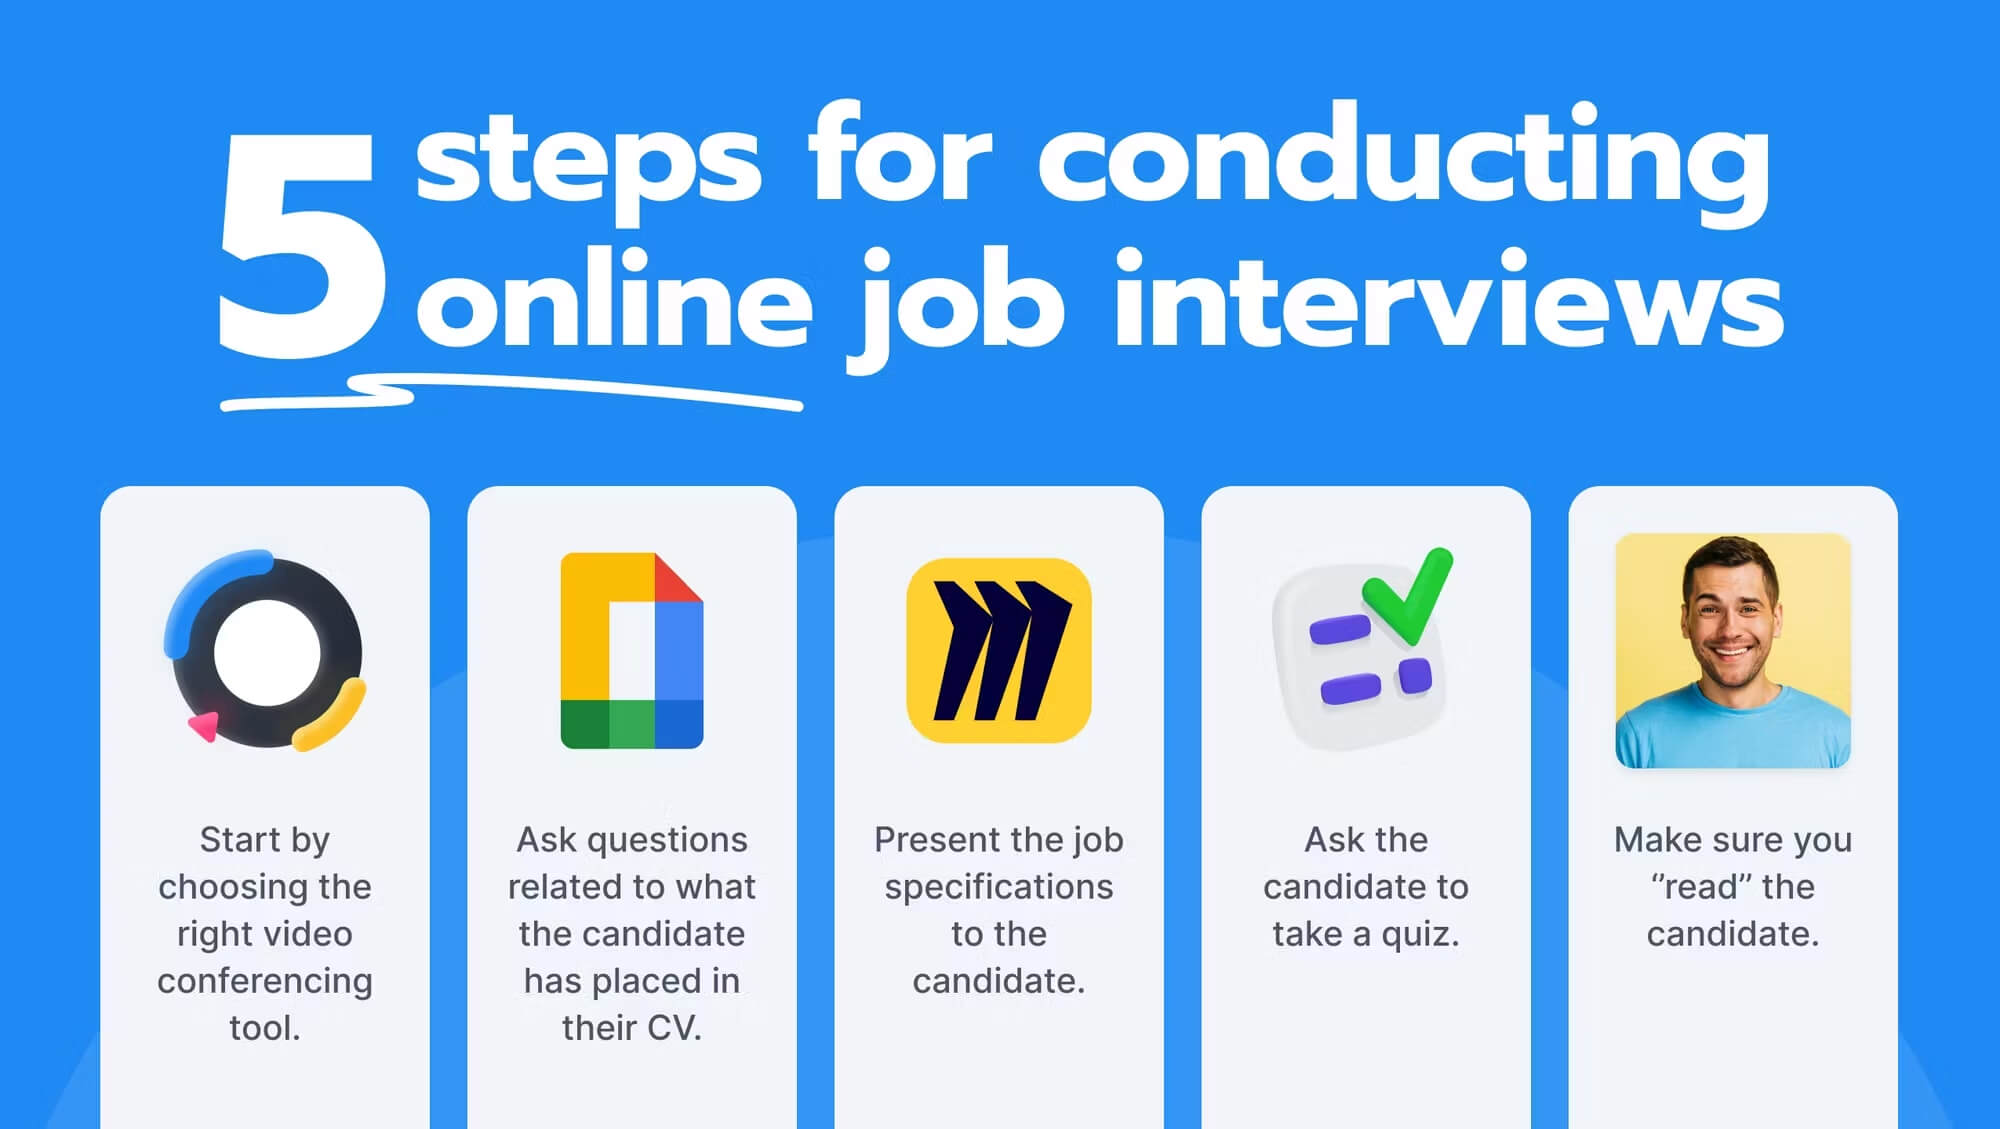 5 ways for conducting online job interviews